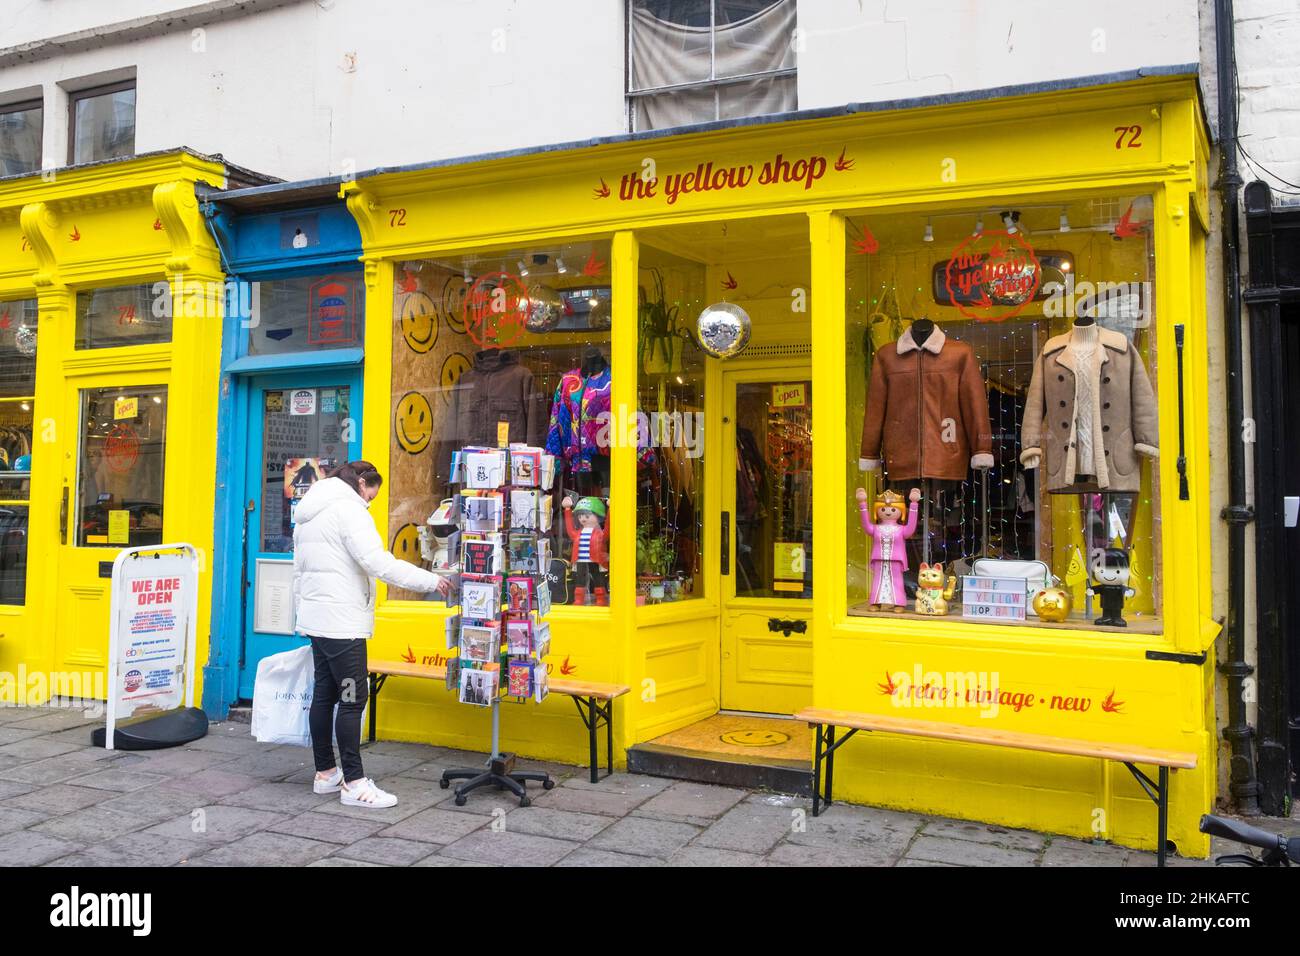 Views around the City of Bath, Somerset, UK. The Little Yellow shop on Walcot St. Home of many independent shops. Stock Photo